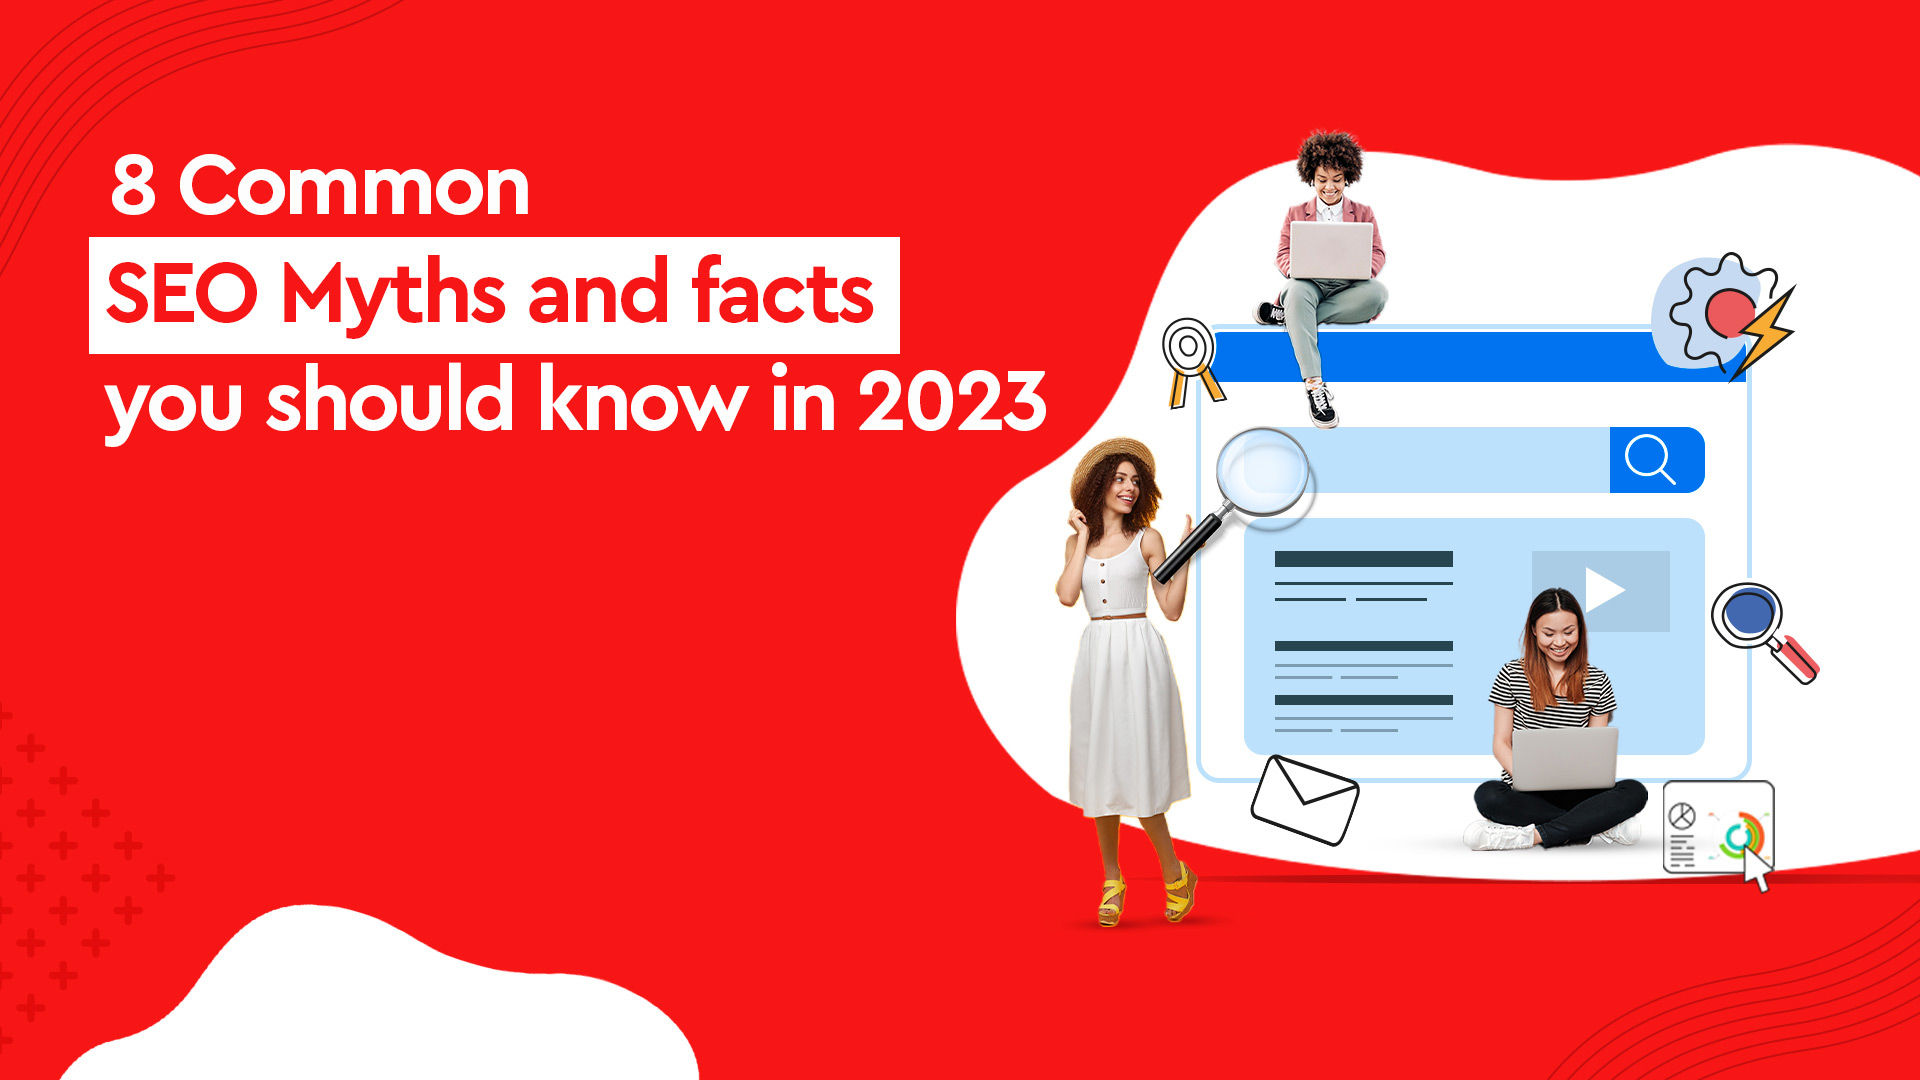 8 Common SEO Myths and facts you should know in 2023